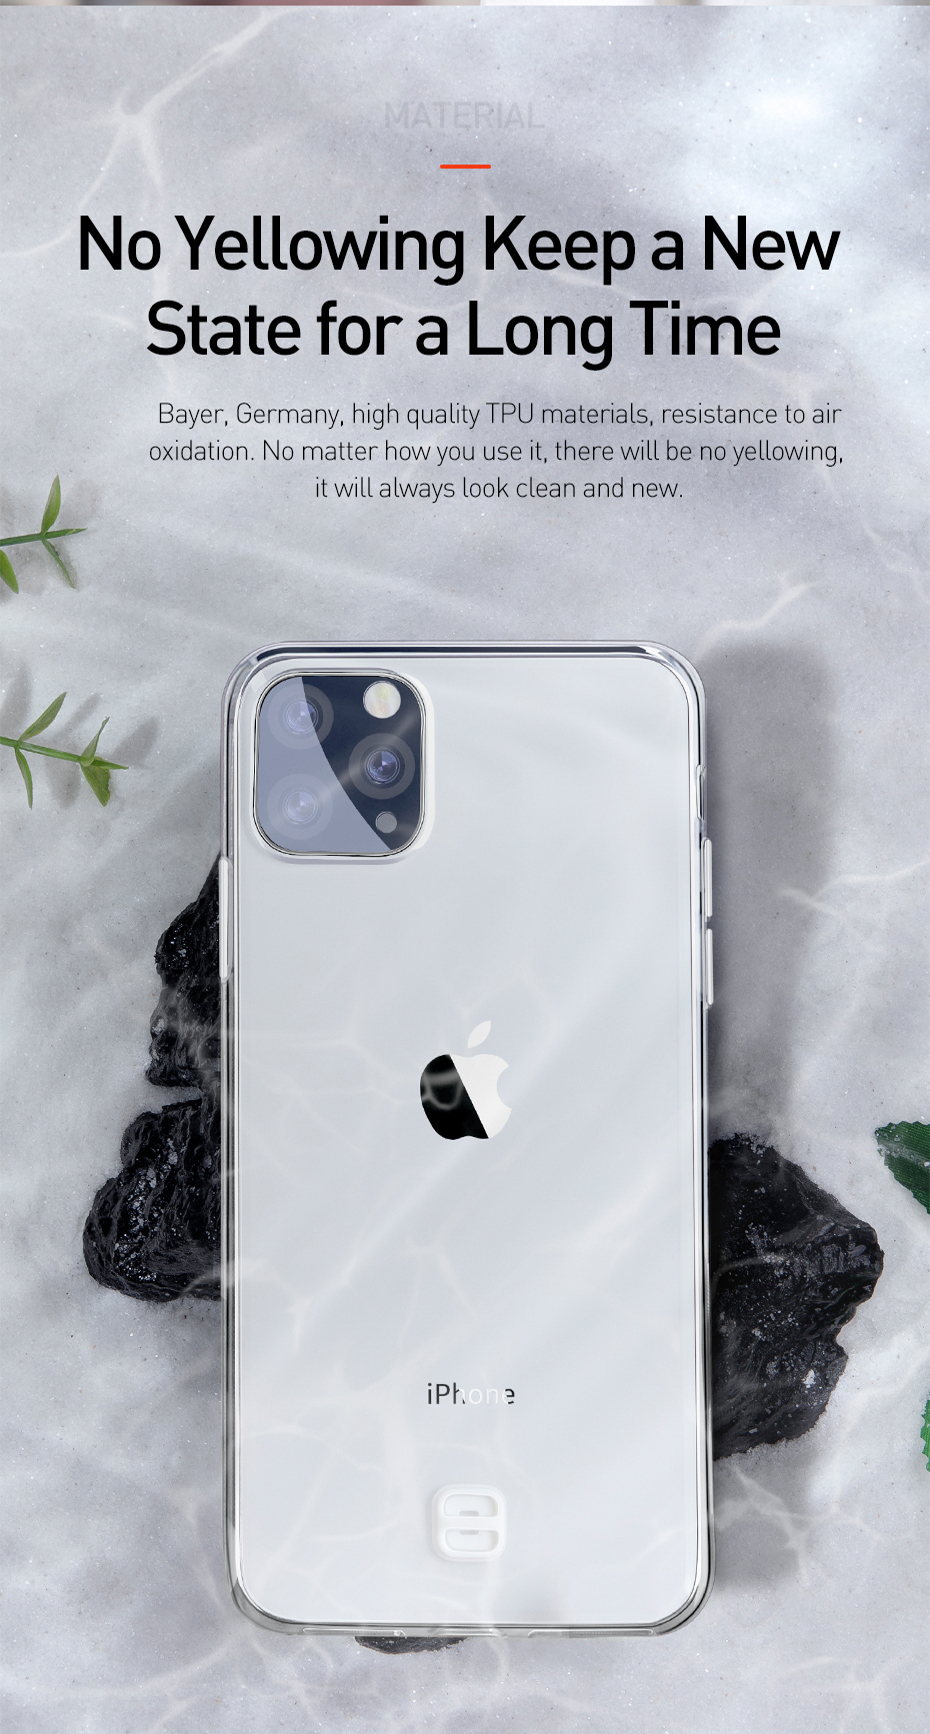 Baseus-Clear-Transparent-Soft-TPU-Protective-Case-with-Lanyard-For-iPhone-11-Pro-Max-65-Inch-1586364-10